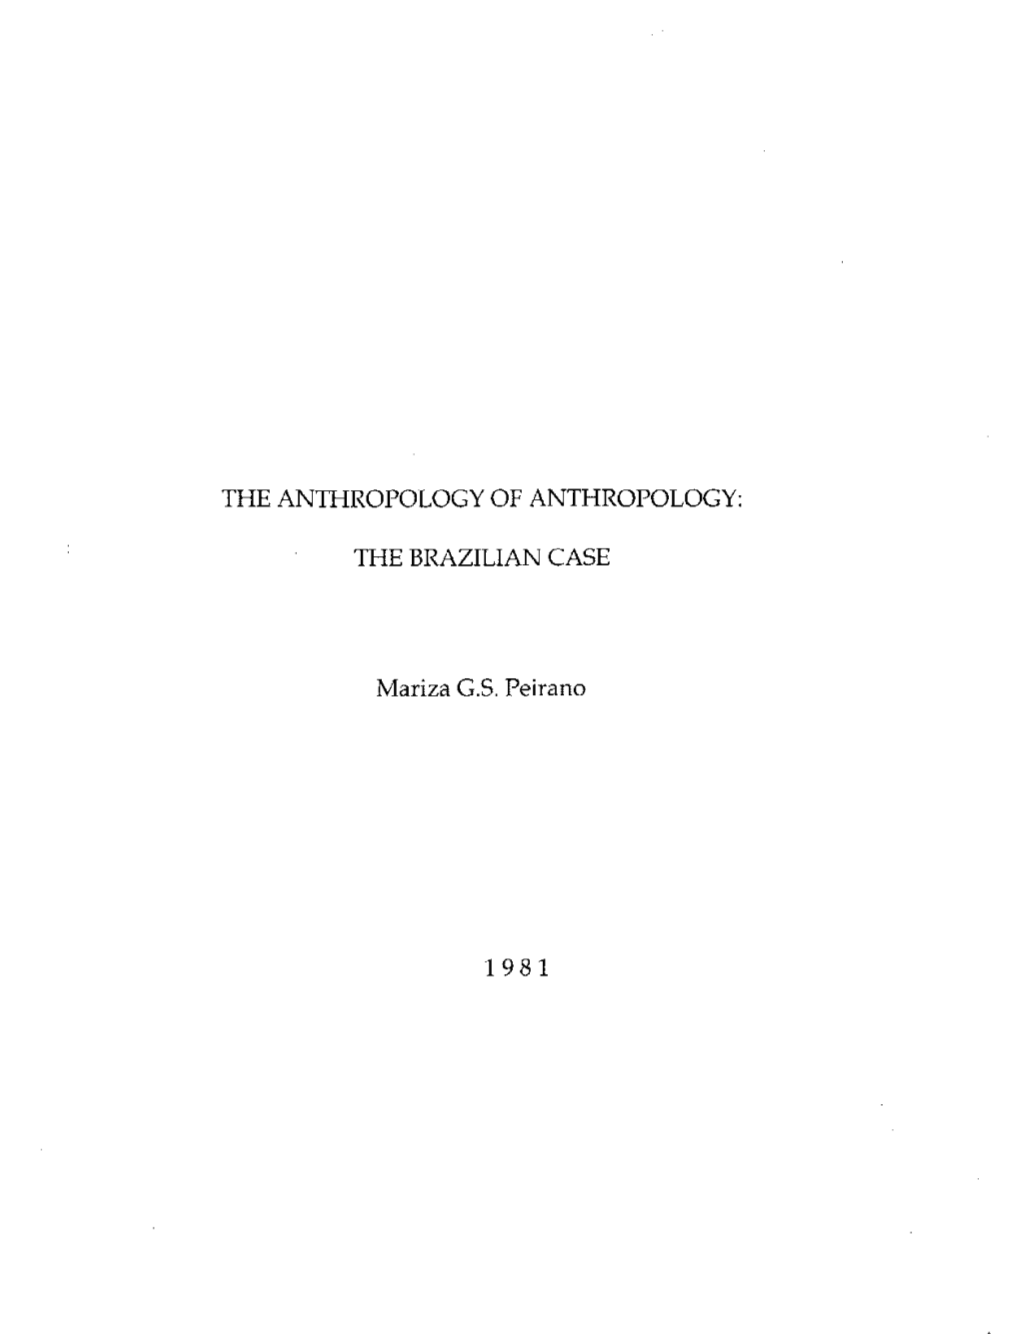 The Anthropology of Anthropology: The